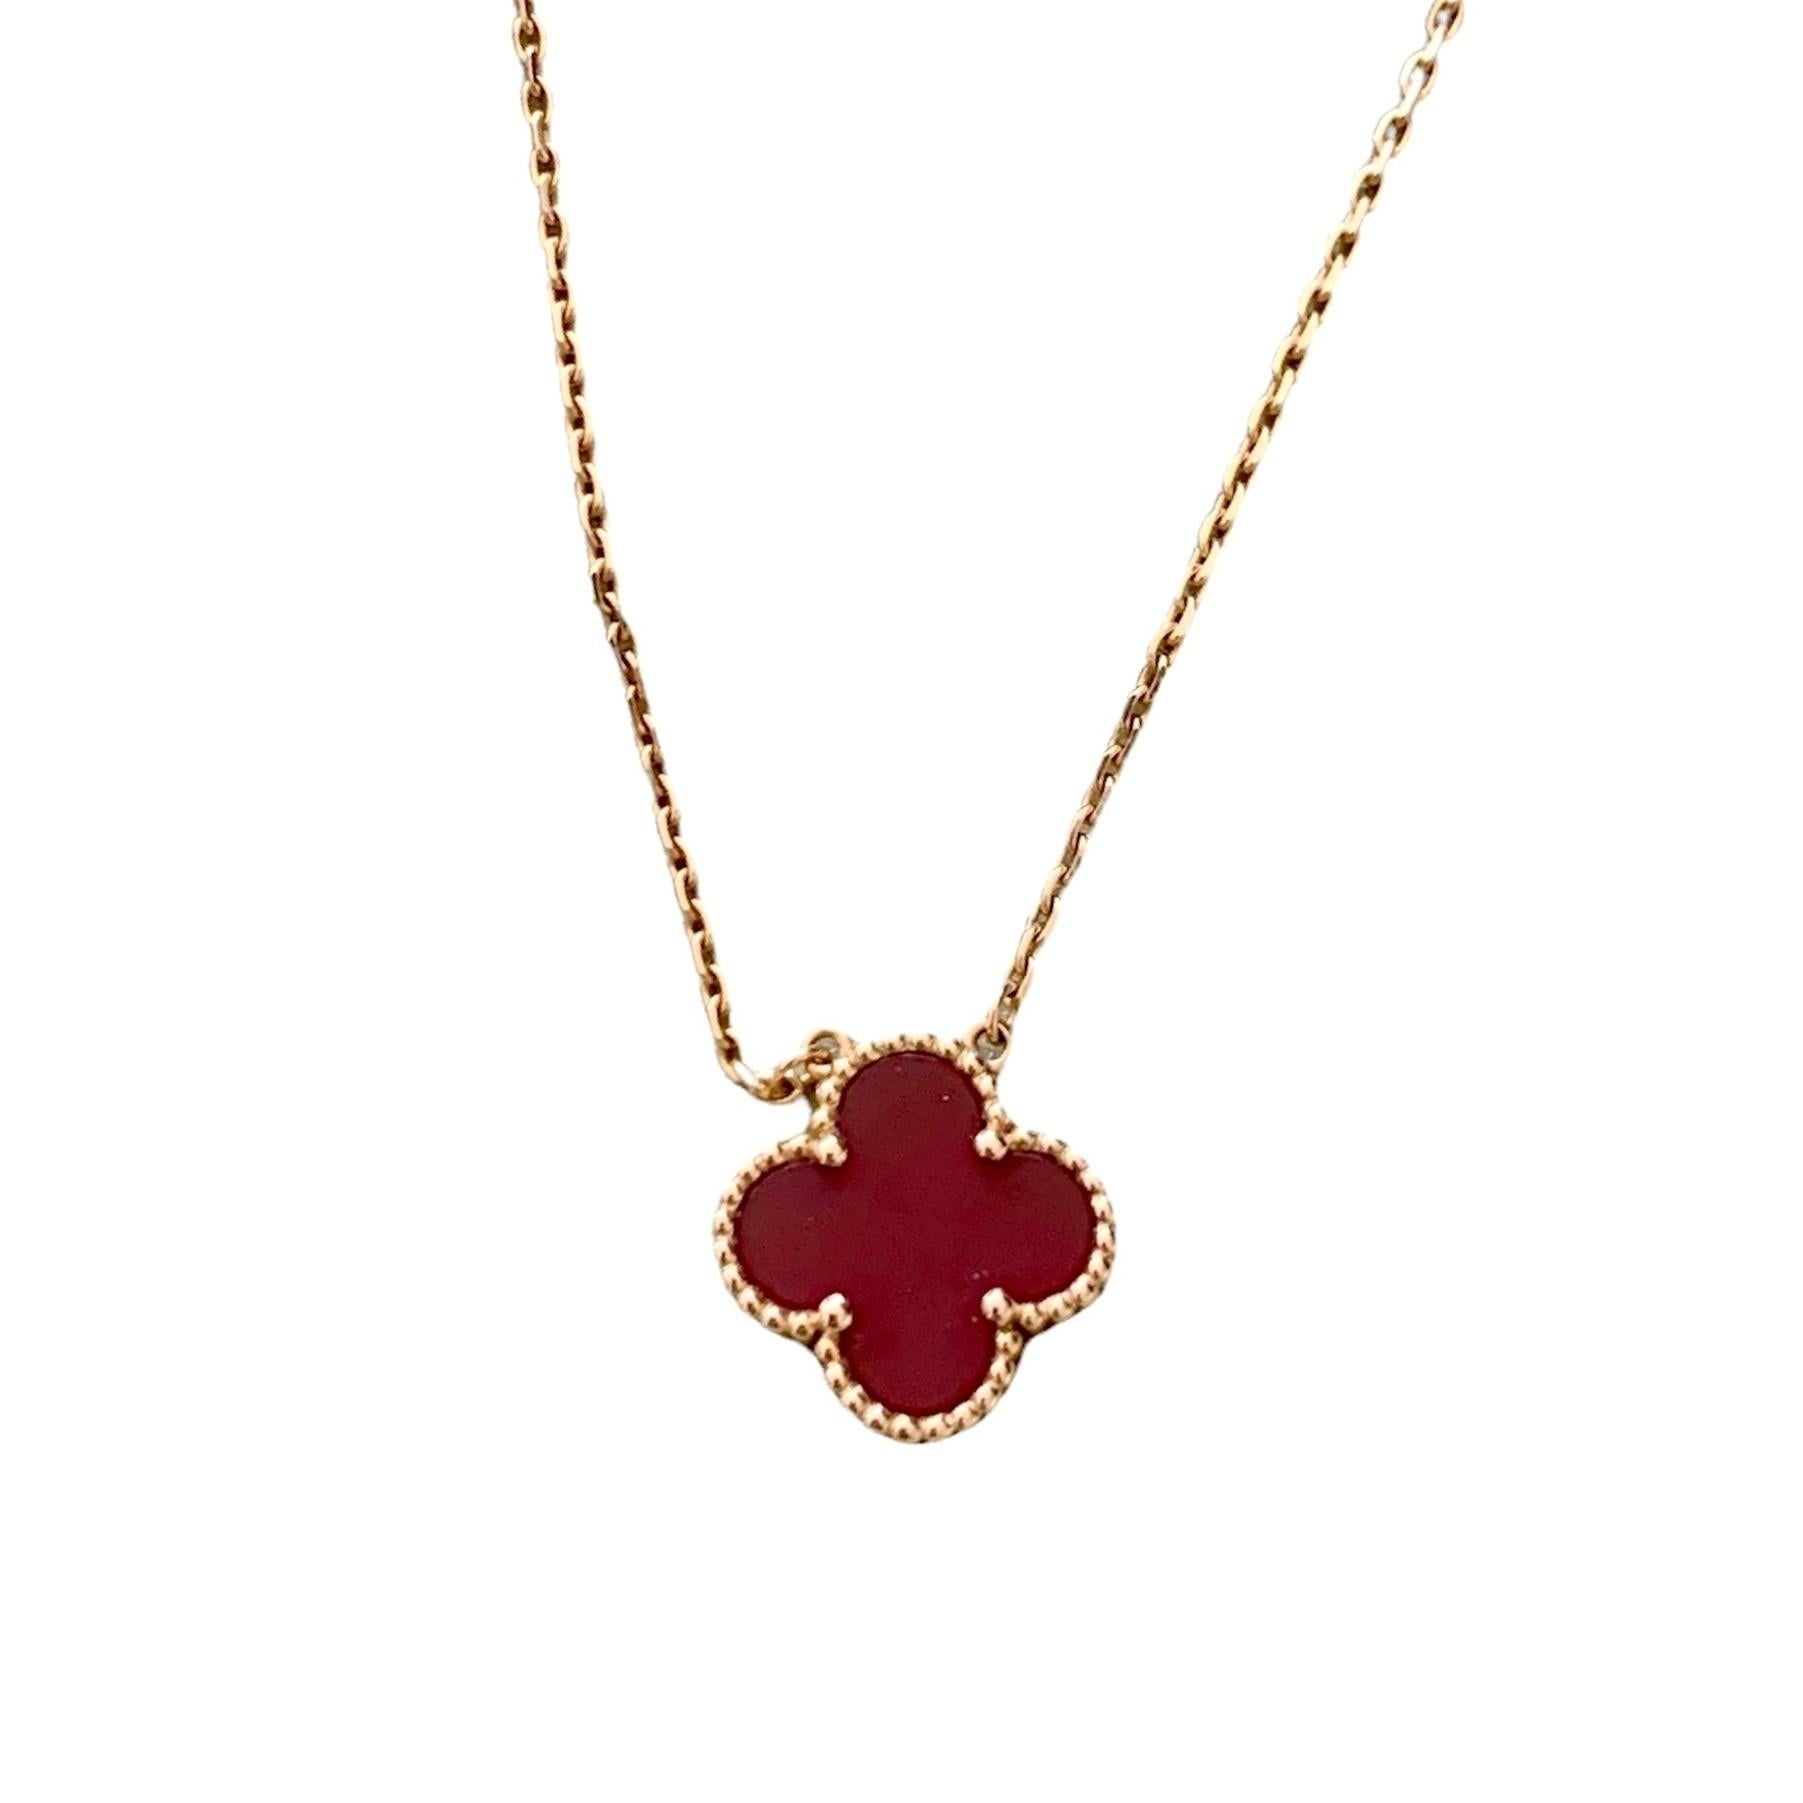 Pretty Van Cleef & Arpels Alhambra Vintage necklace in yellow gold with a four-lobed clover pendant in carnelian in beaded setting.

Dimensions: 14.60 x 14.60 x 2.30 mm (0.573 x0.573 x 0.089 inches)

Chain length: 42 cm (16.535 inches)

Weight: 5.2